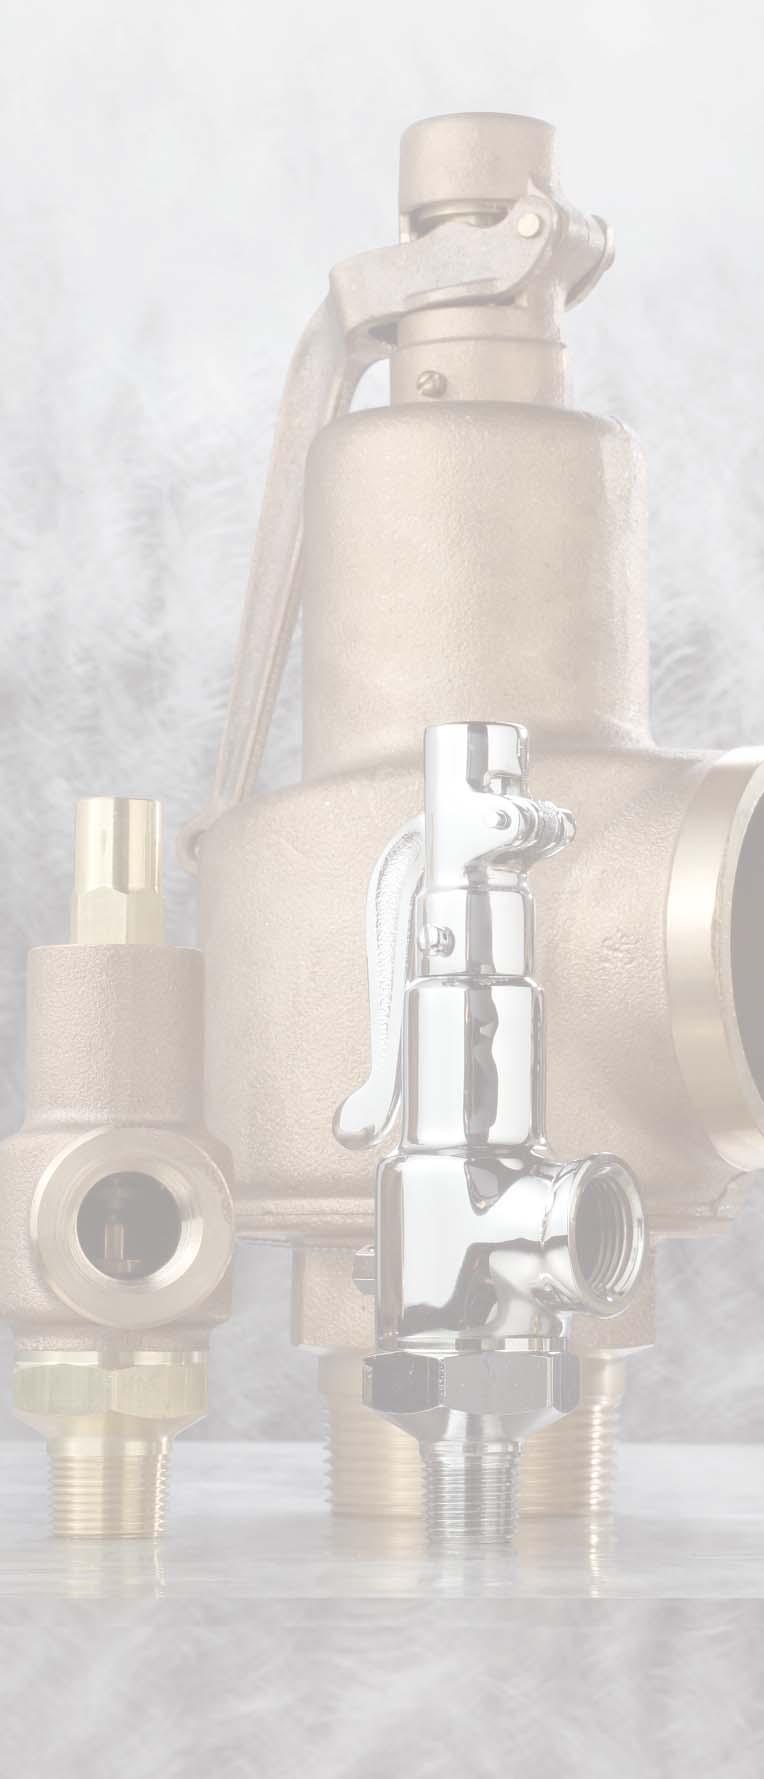 SAFETY VALVES ASME Section I & VIII - NB Certified for Air, Gas and Steam SIZES FROM 1/2 TO 2 1/2 NB RATED TO 250# TEMPERATURES TO 406 O Aquatrol s Series / valve line is a high capacity safety valve